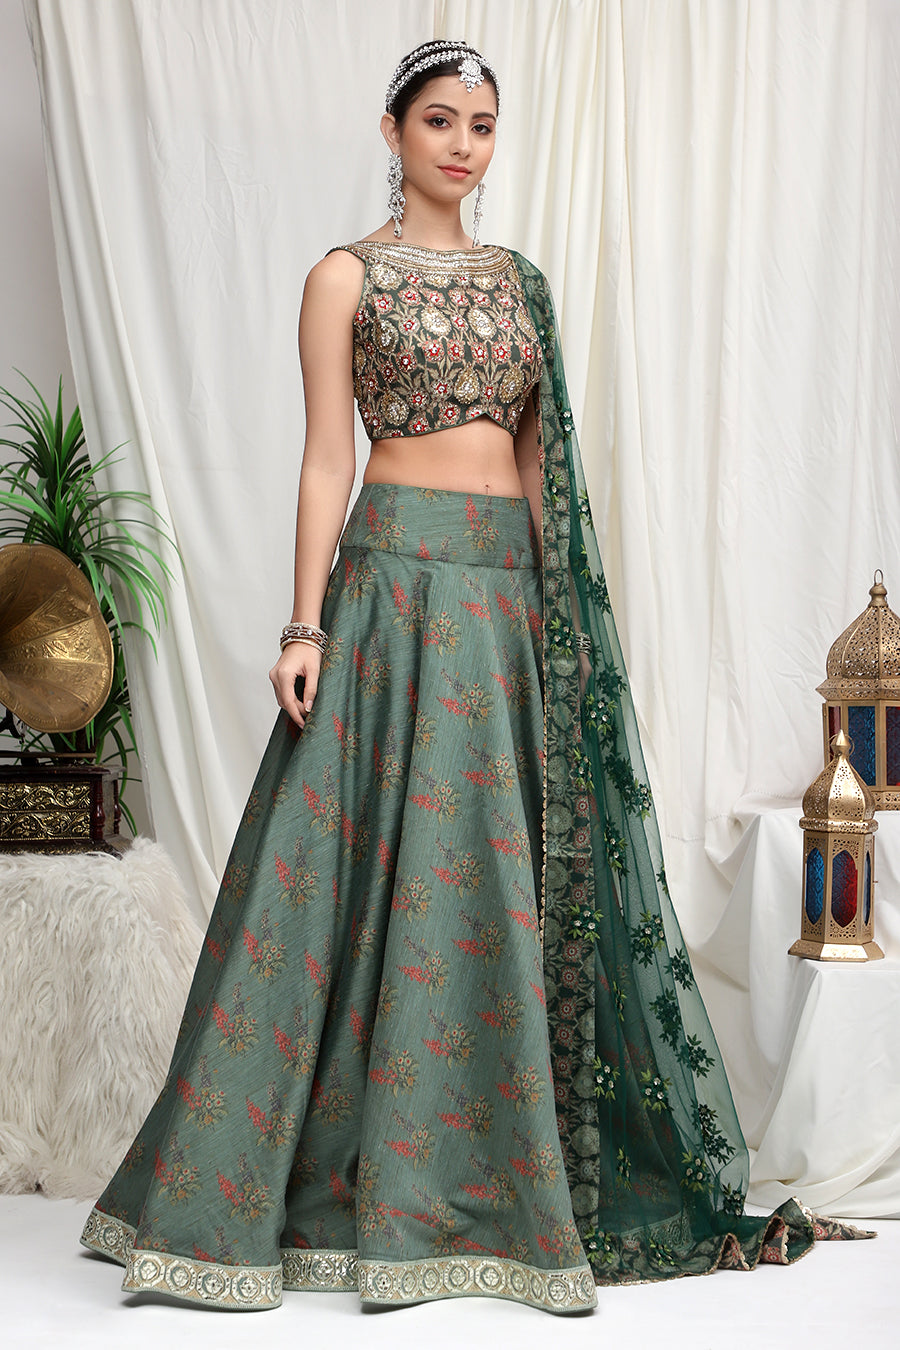 Buy Ruby Matching Saree Center Women's Crop Top with Net Lehenga/Lehenga  Choli and Dupatta Set, Net Work Crop Top Lehenga with Fully-Stitched Blouse  (Free Size, Green) at Amazon.in